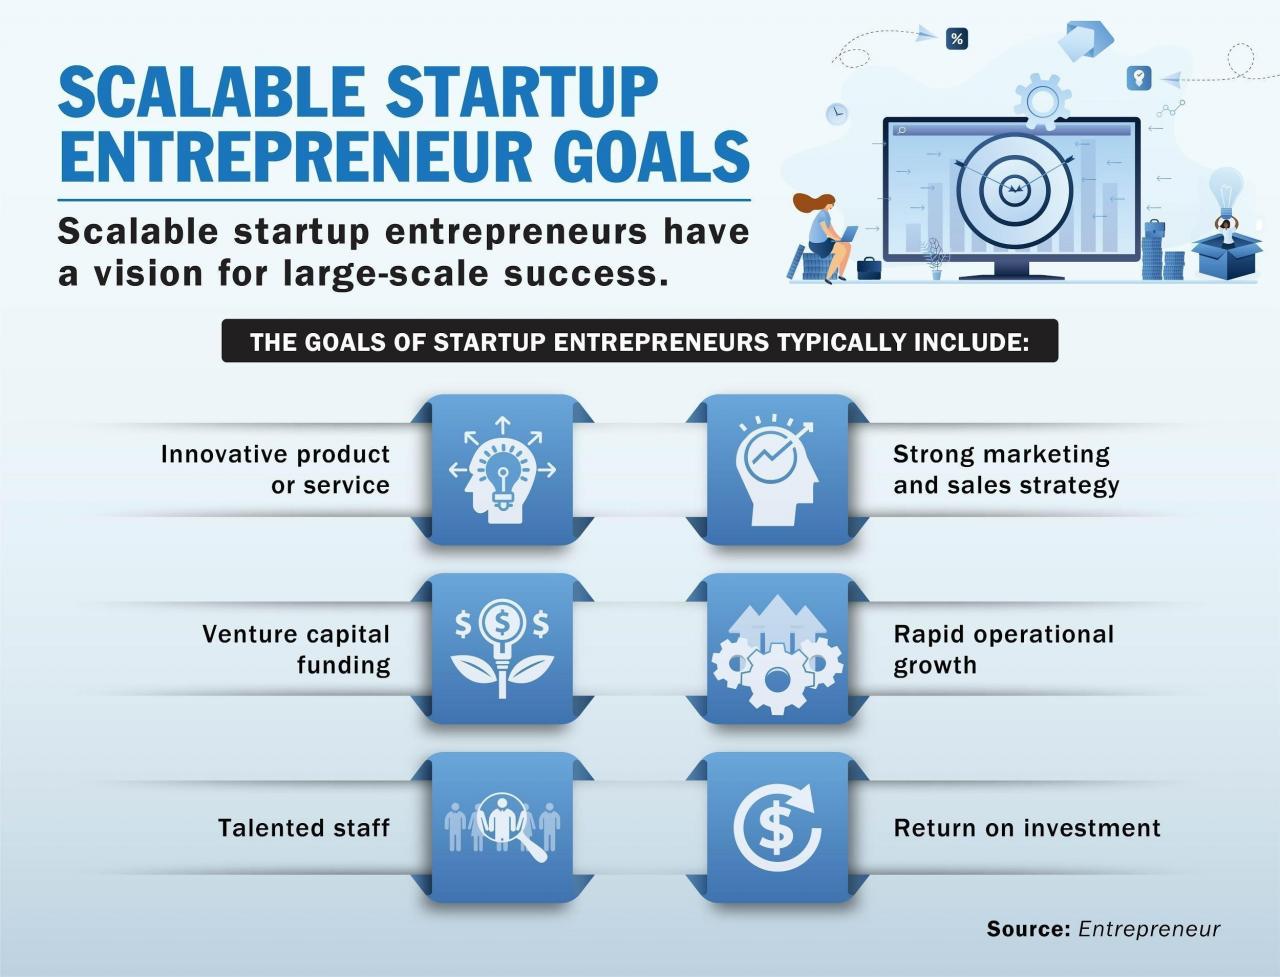 Scalable startup entrepreneurs work toward a large-scale vision of success.